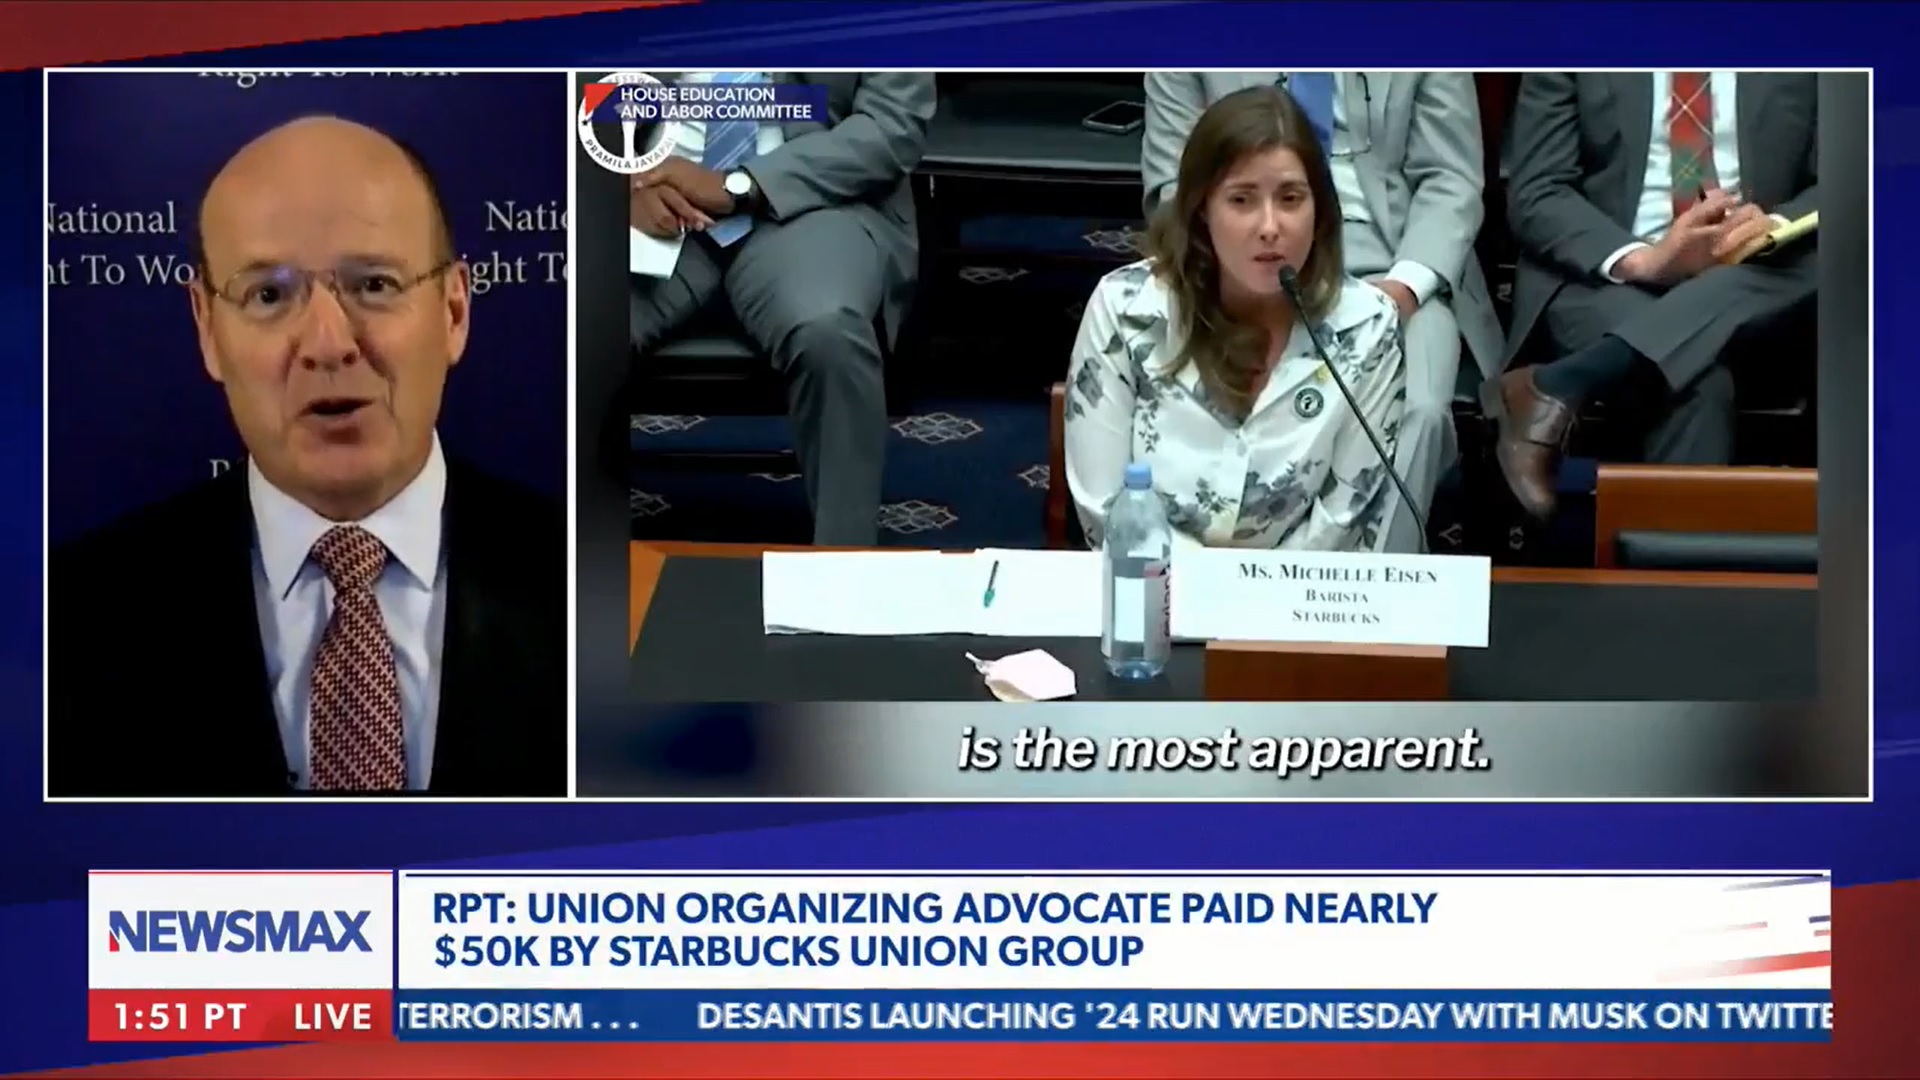 Mark Mix appeared on Newsmax TV this summer to discuss reports that union bosses spent millions to infiltrate Starbucks workforces with union agitators, many of whom hid their affiliations from their coworkers and even Congress.